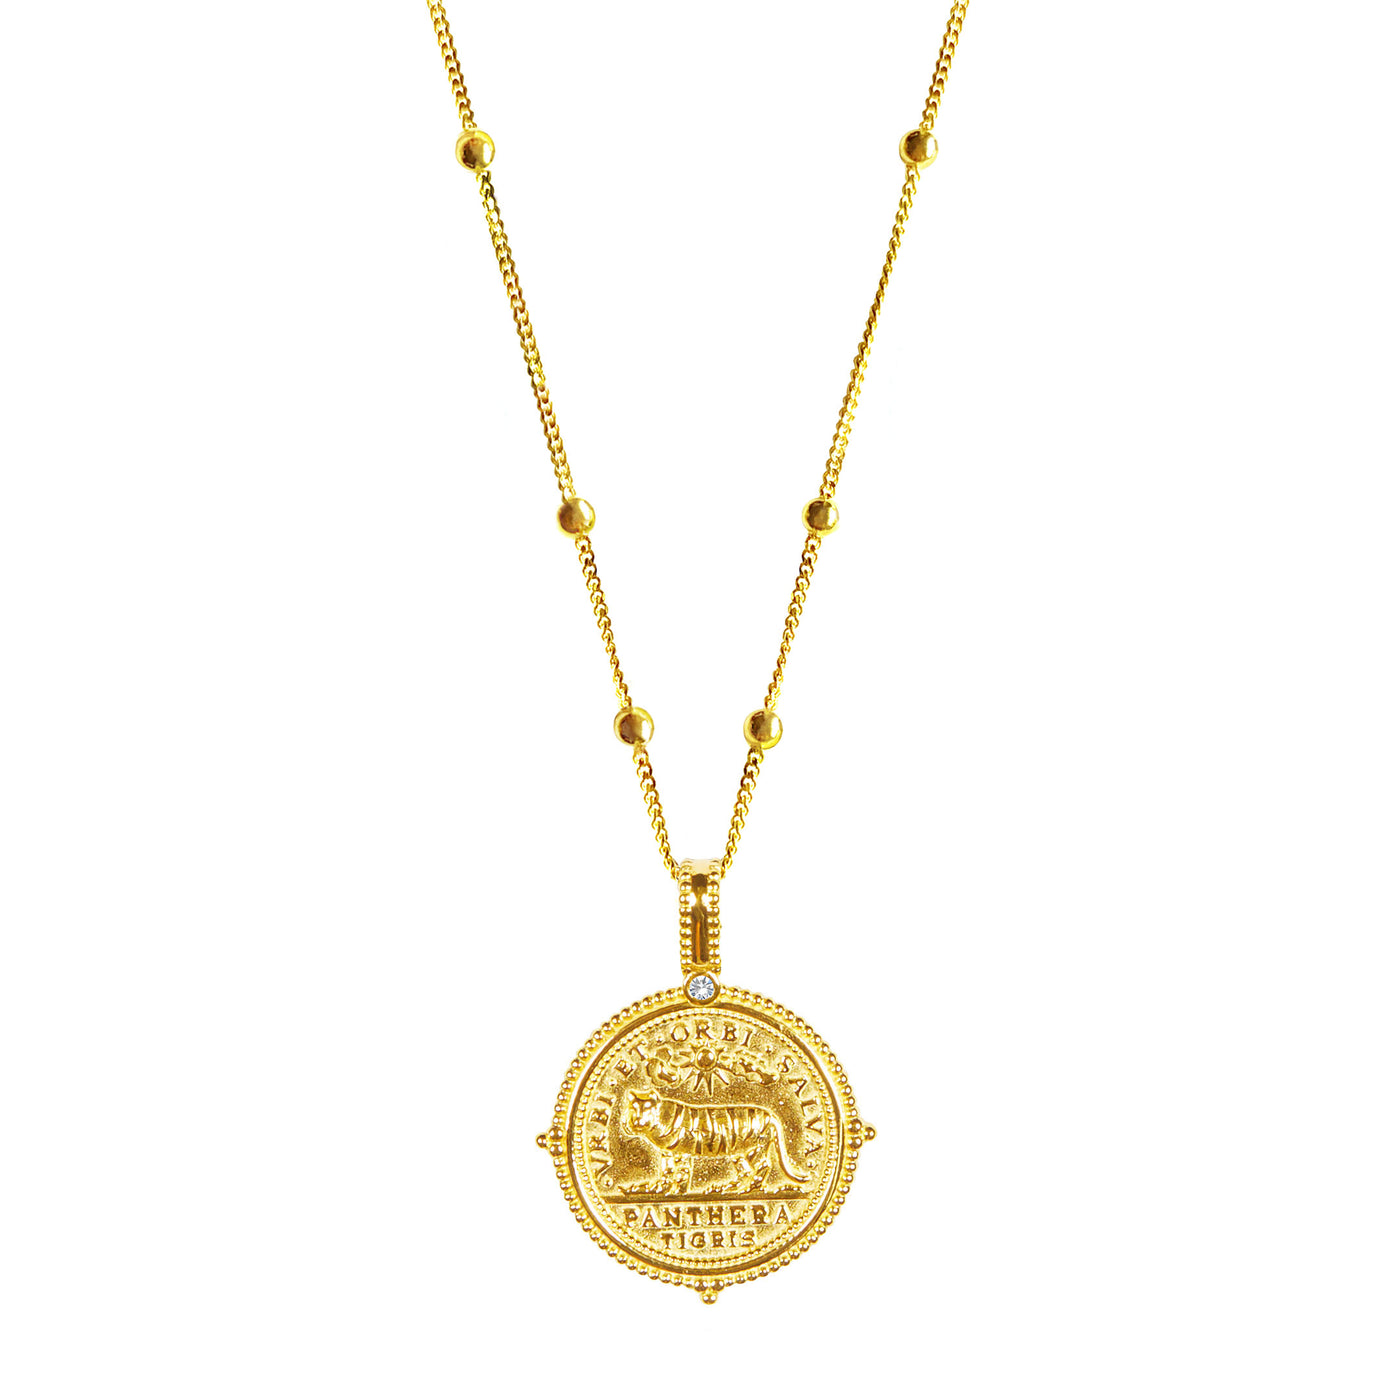 Gold plated sterling silver rope necklace and engraved tiger coin pendant on bobble chain